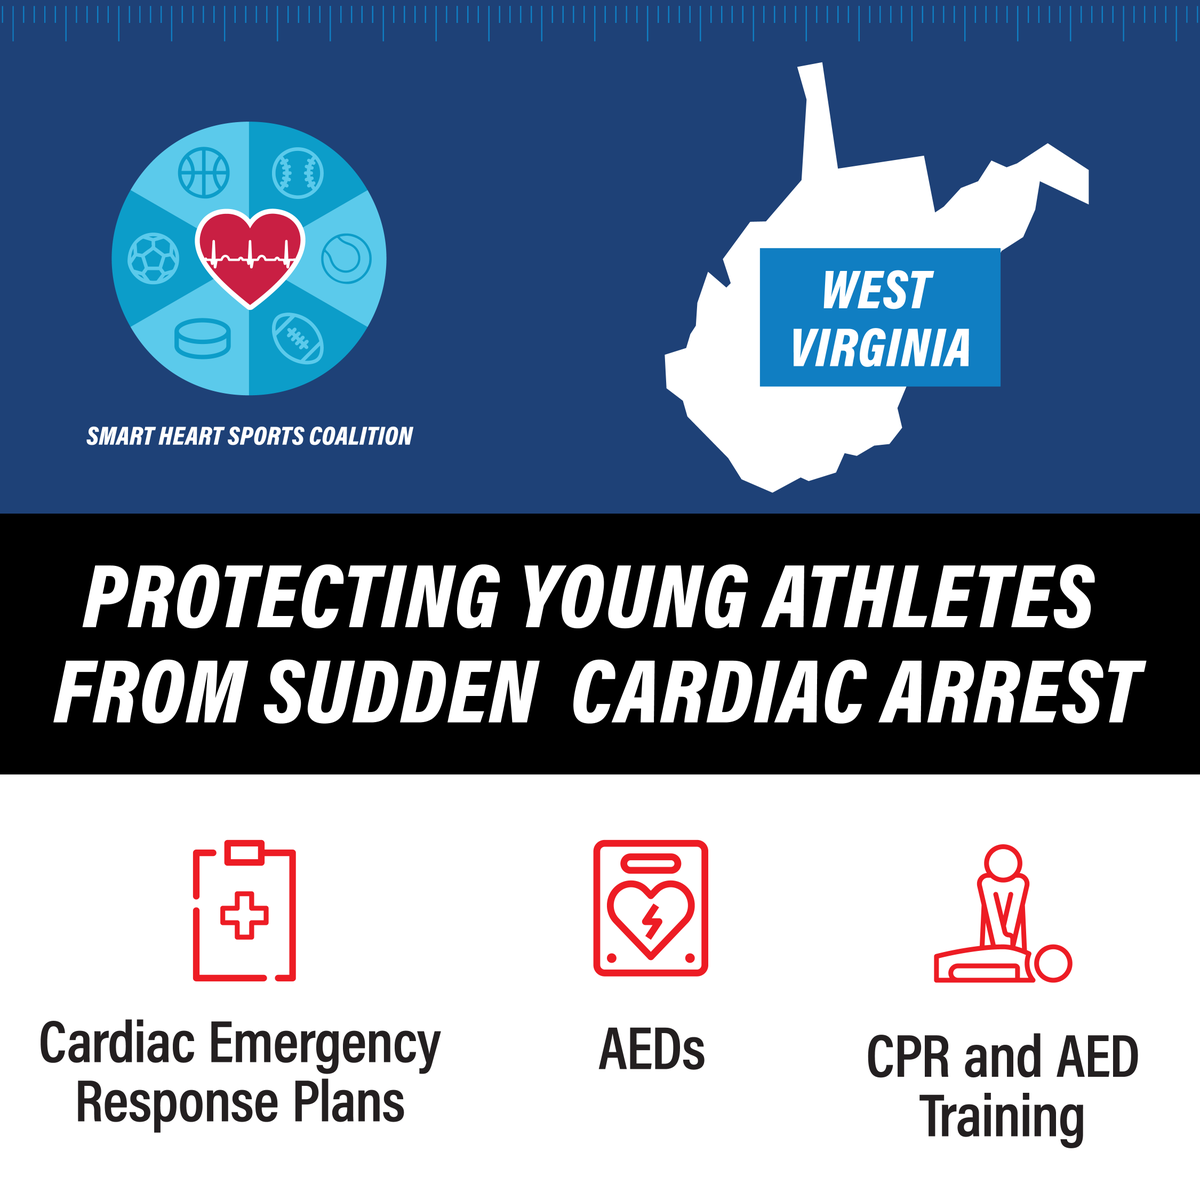 West Virginia recently signed into law a bill requiring cardiac emergency response plans for athletic events on school grounds, AEDs in close proximity to such sites, and CPR and AED training for coaches and other key staff – all essential to best protect young athletes.